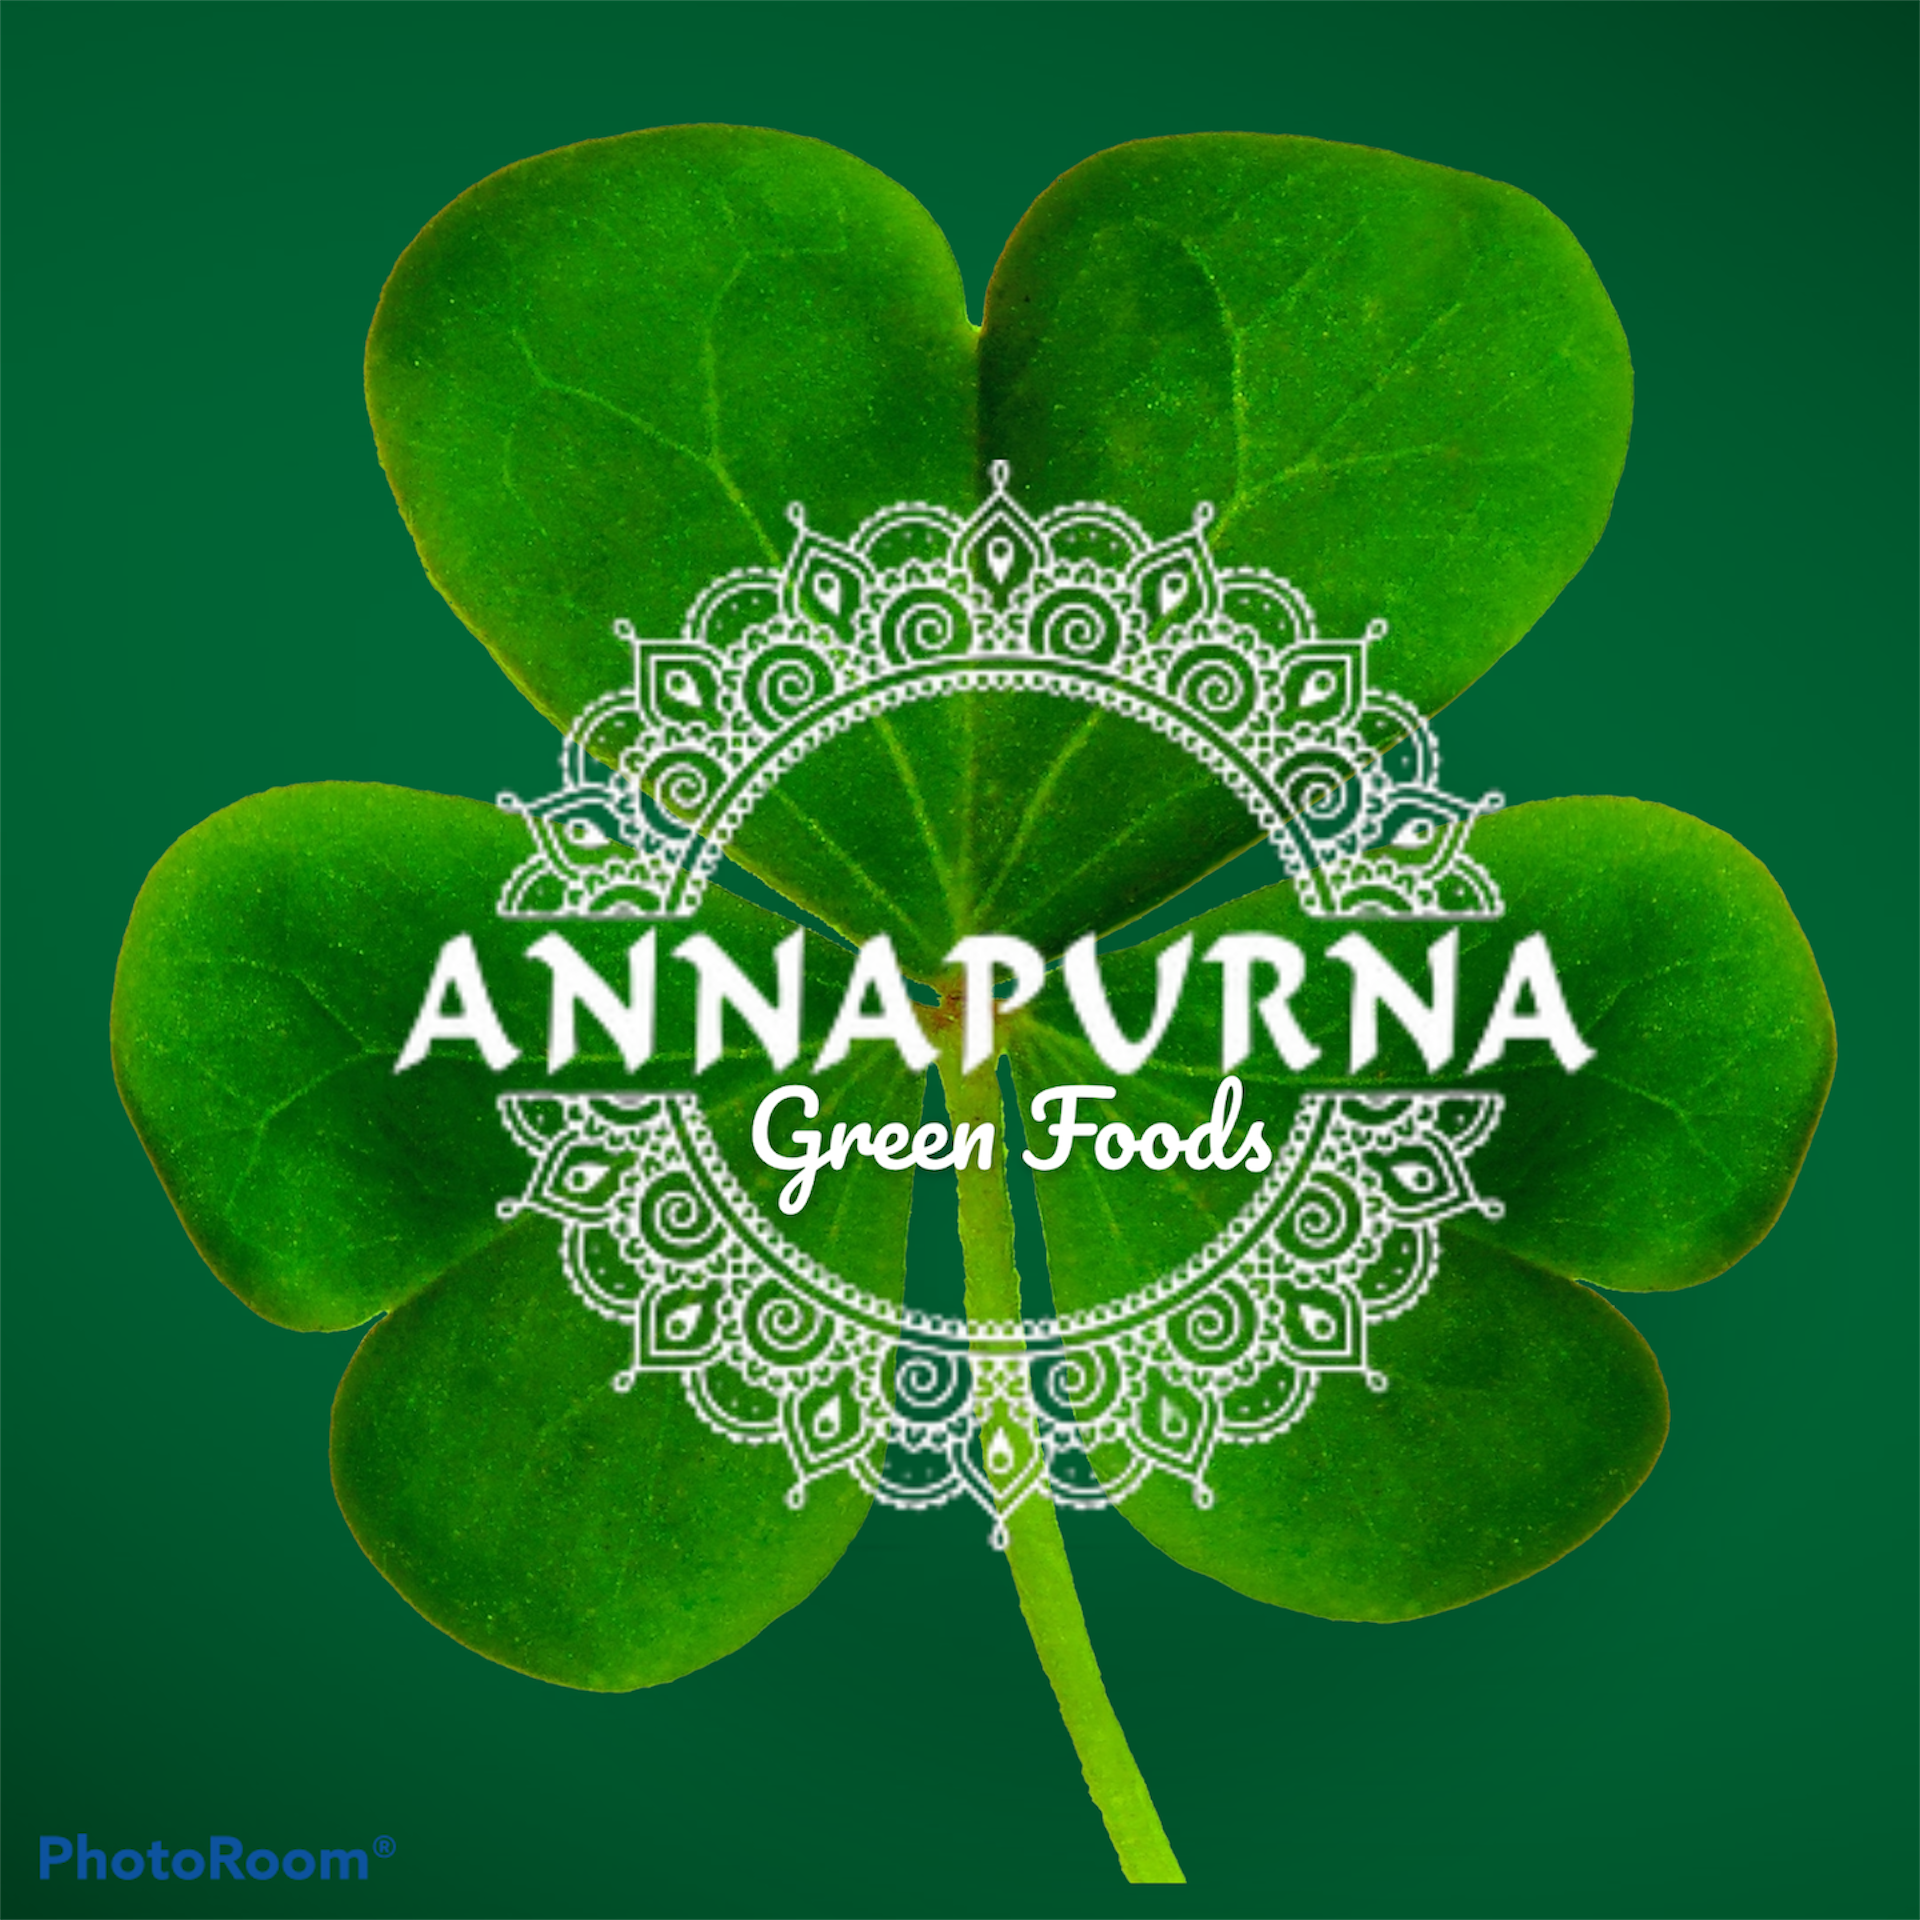 Annapurna Green Foods Online Green vegetable Shopping and Fresh Sprouts market India , Sprouts, ready to eat sprouts, Buy vegetables and sprouts online at the best price, Mixed Gram, Moong Green, moog, Green Peas, Channa Brown